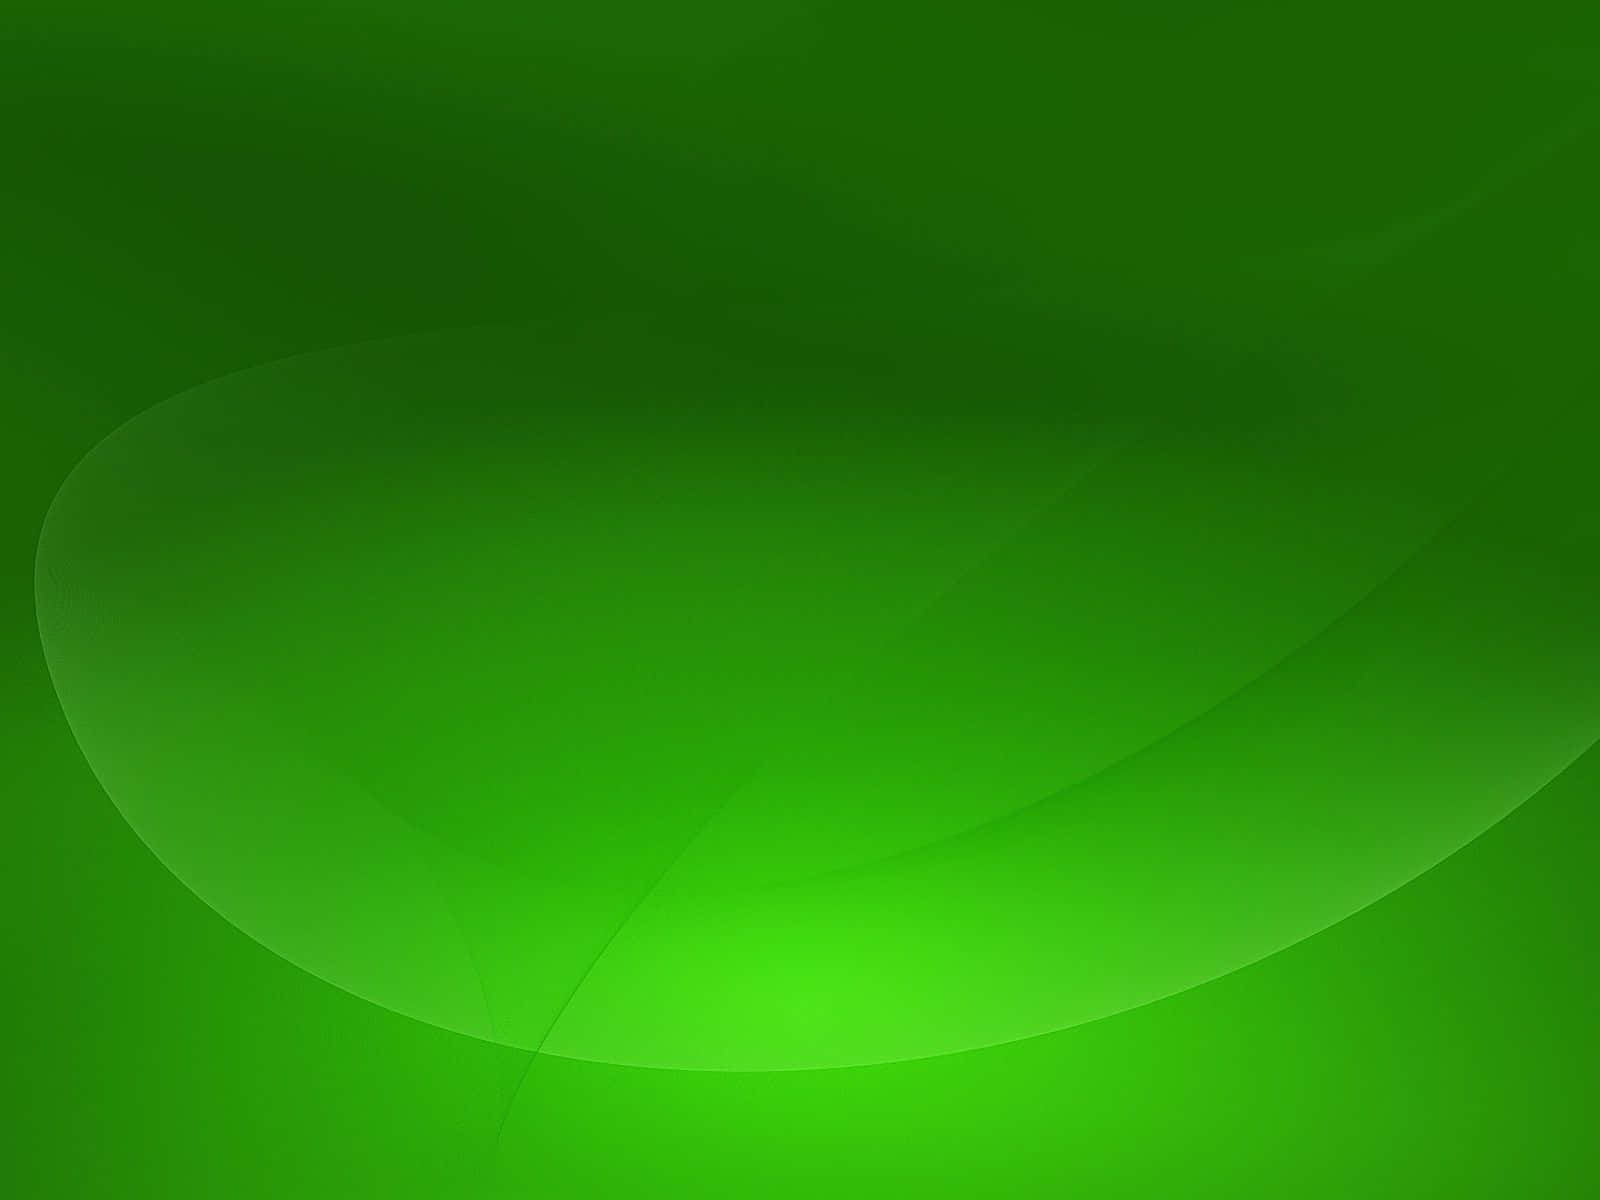 Solid Green - A Clean and Minimalist Background